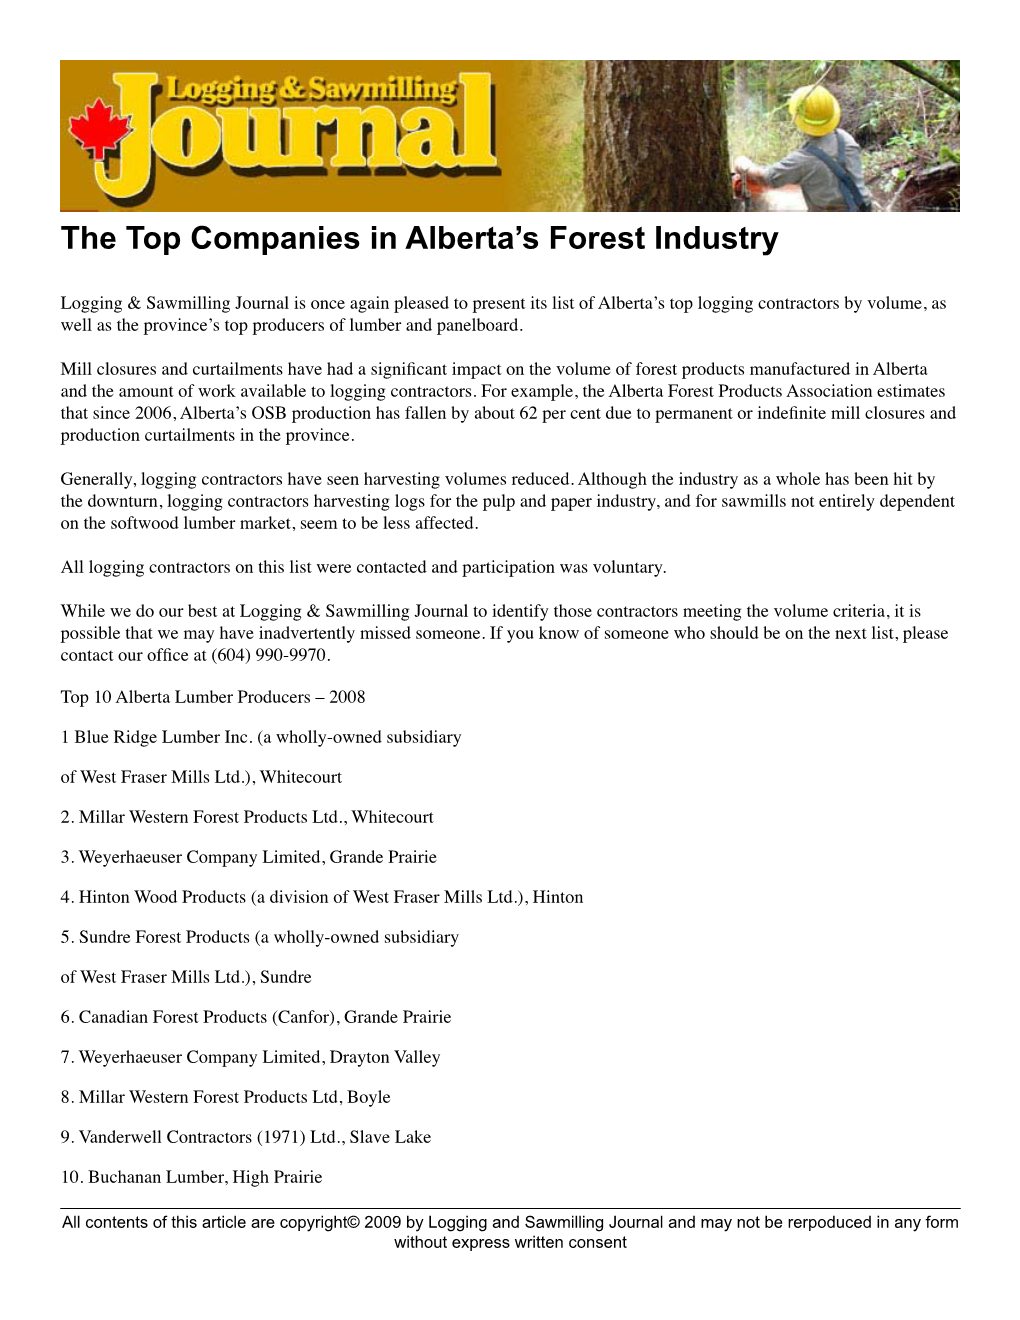 The Top Companies in Alberta's Forest Industry